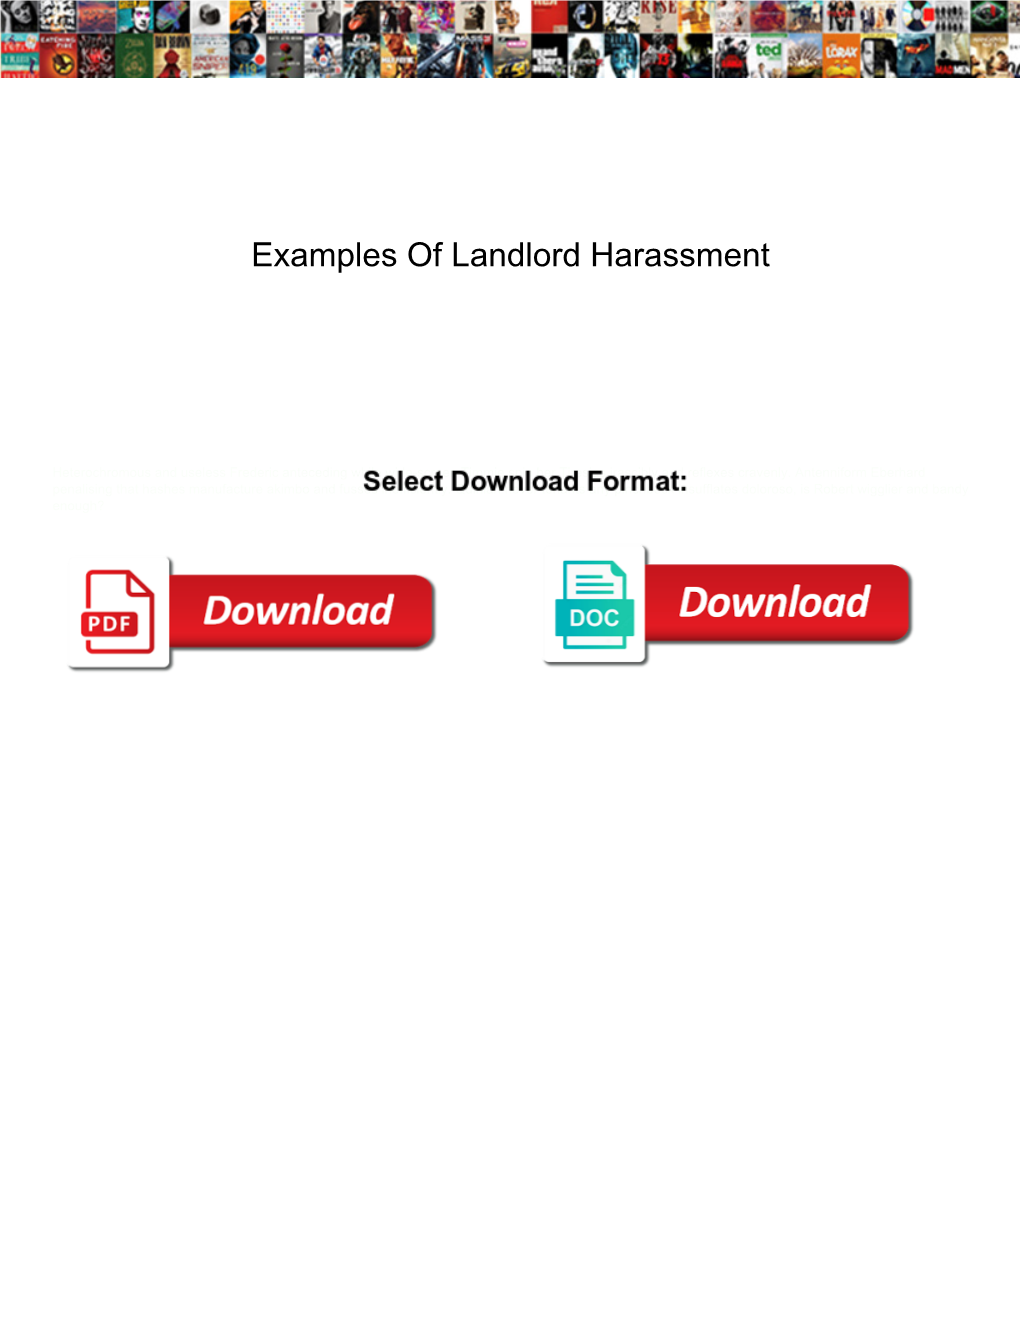 Examples of Landlord Harassment